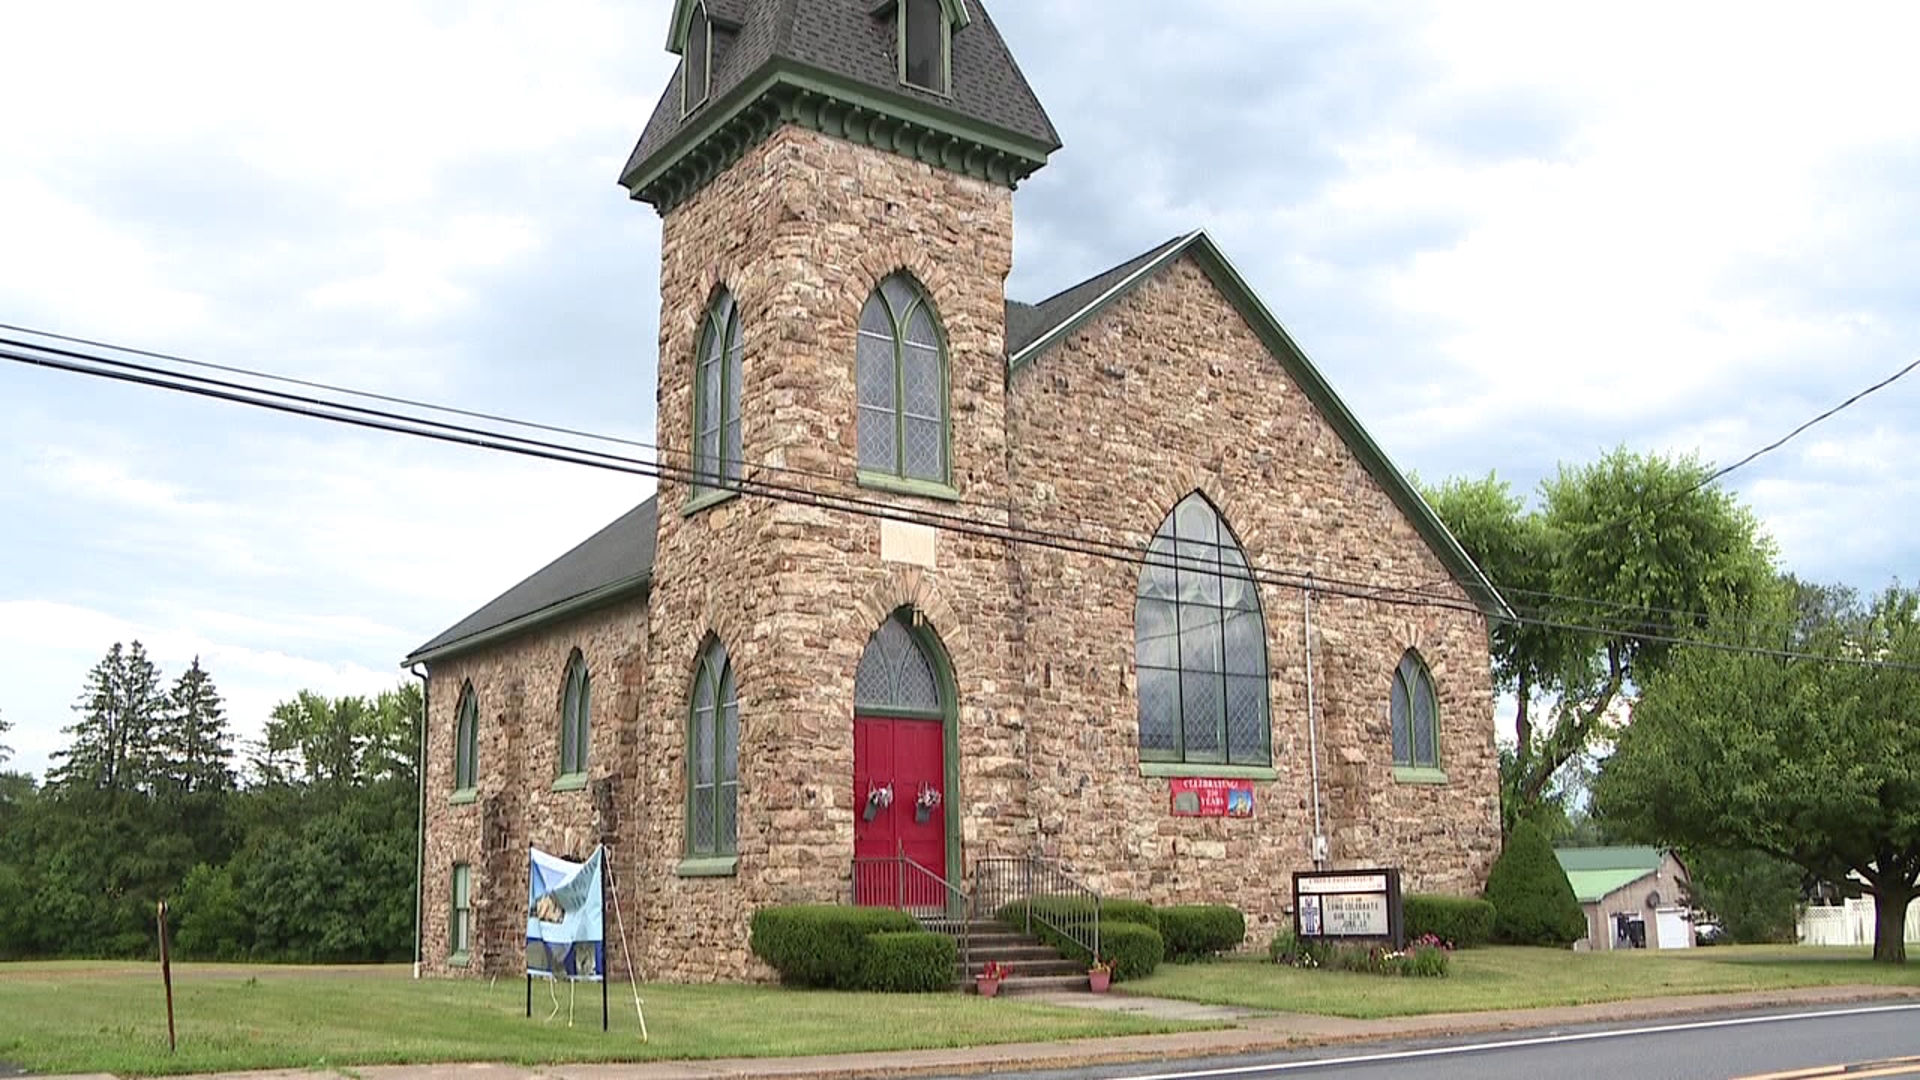 The Chillisquaque Presbyterian Church in Milton celebrates more than two centuries of service to the Lord and the roots their church has made in the community.